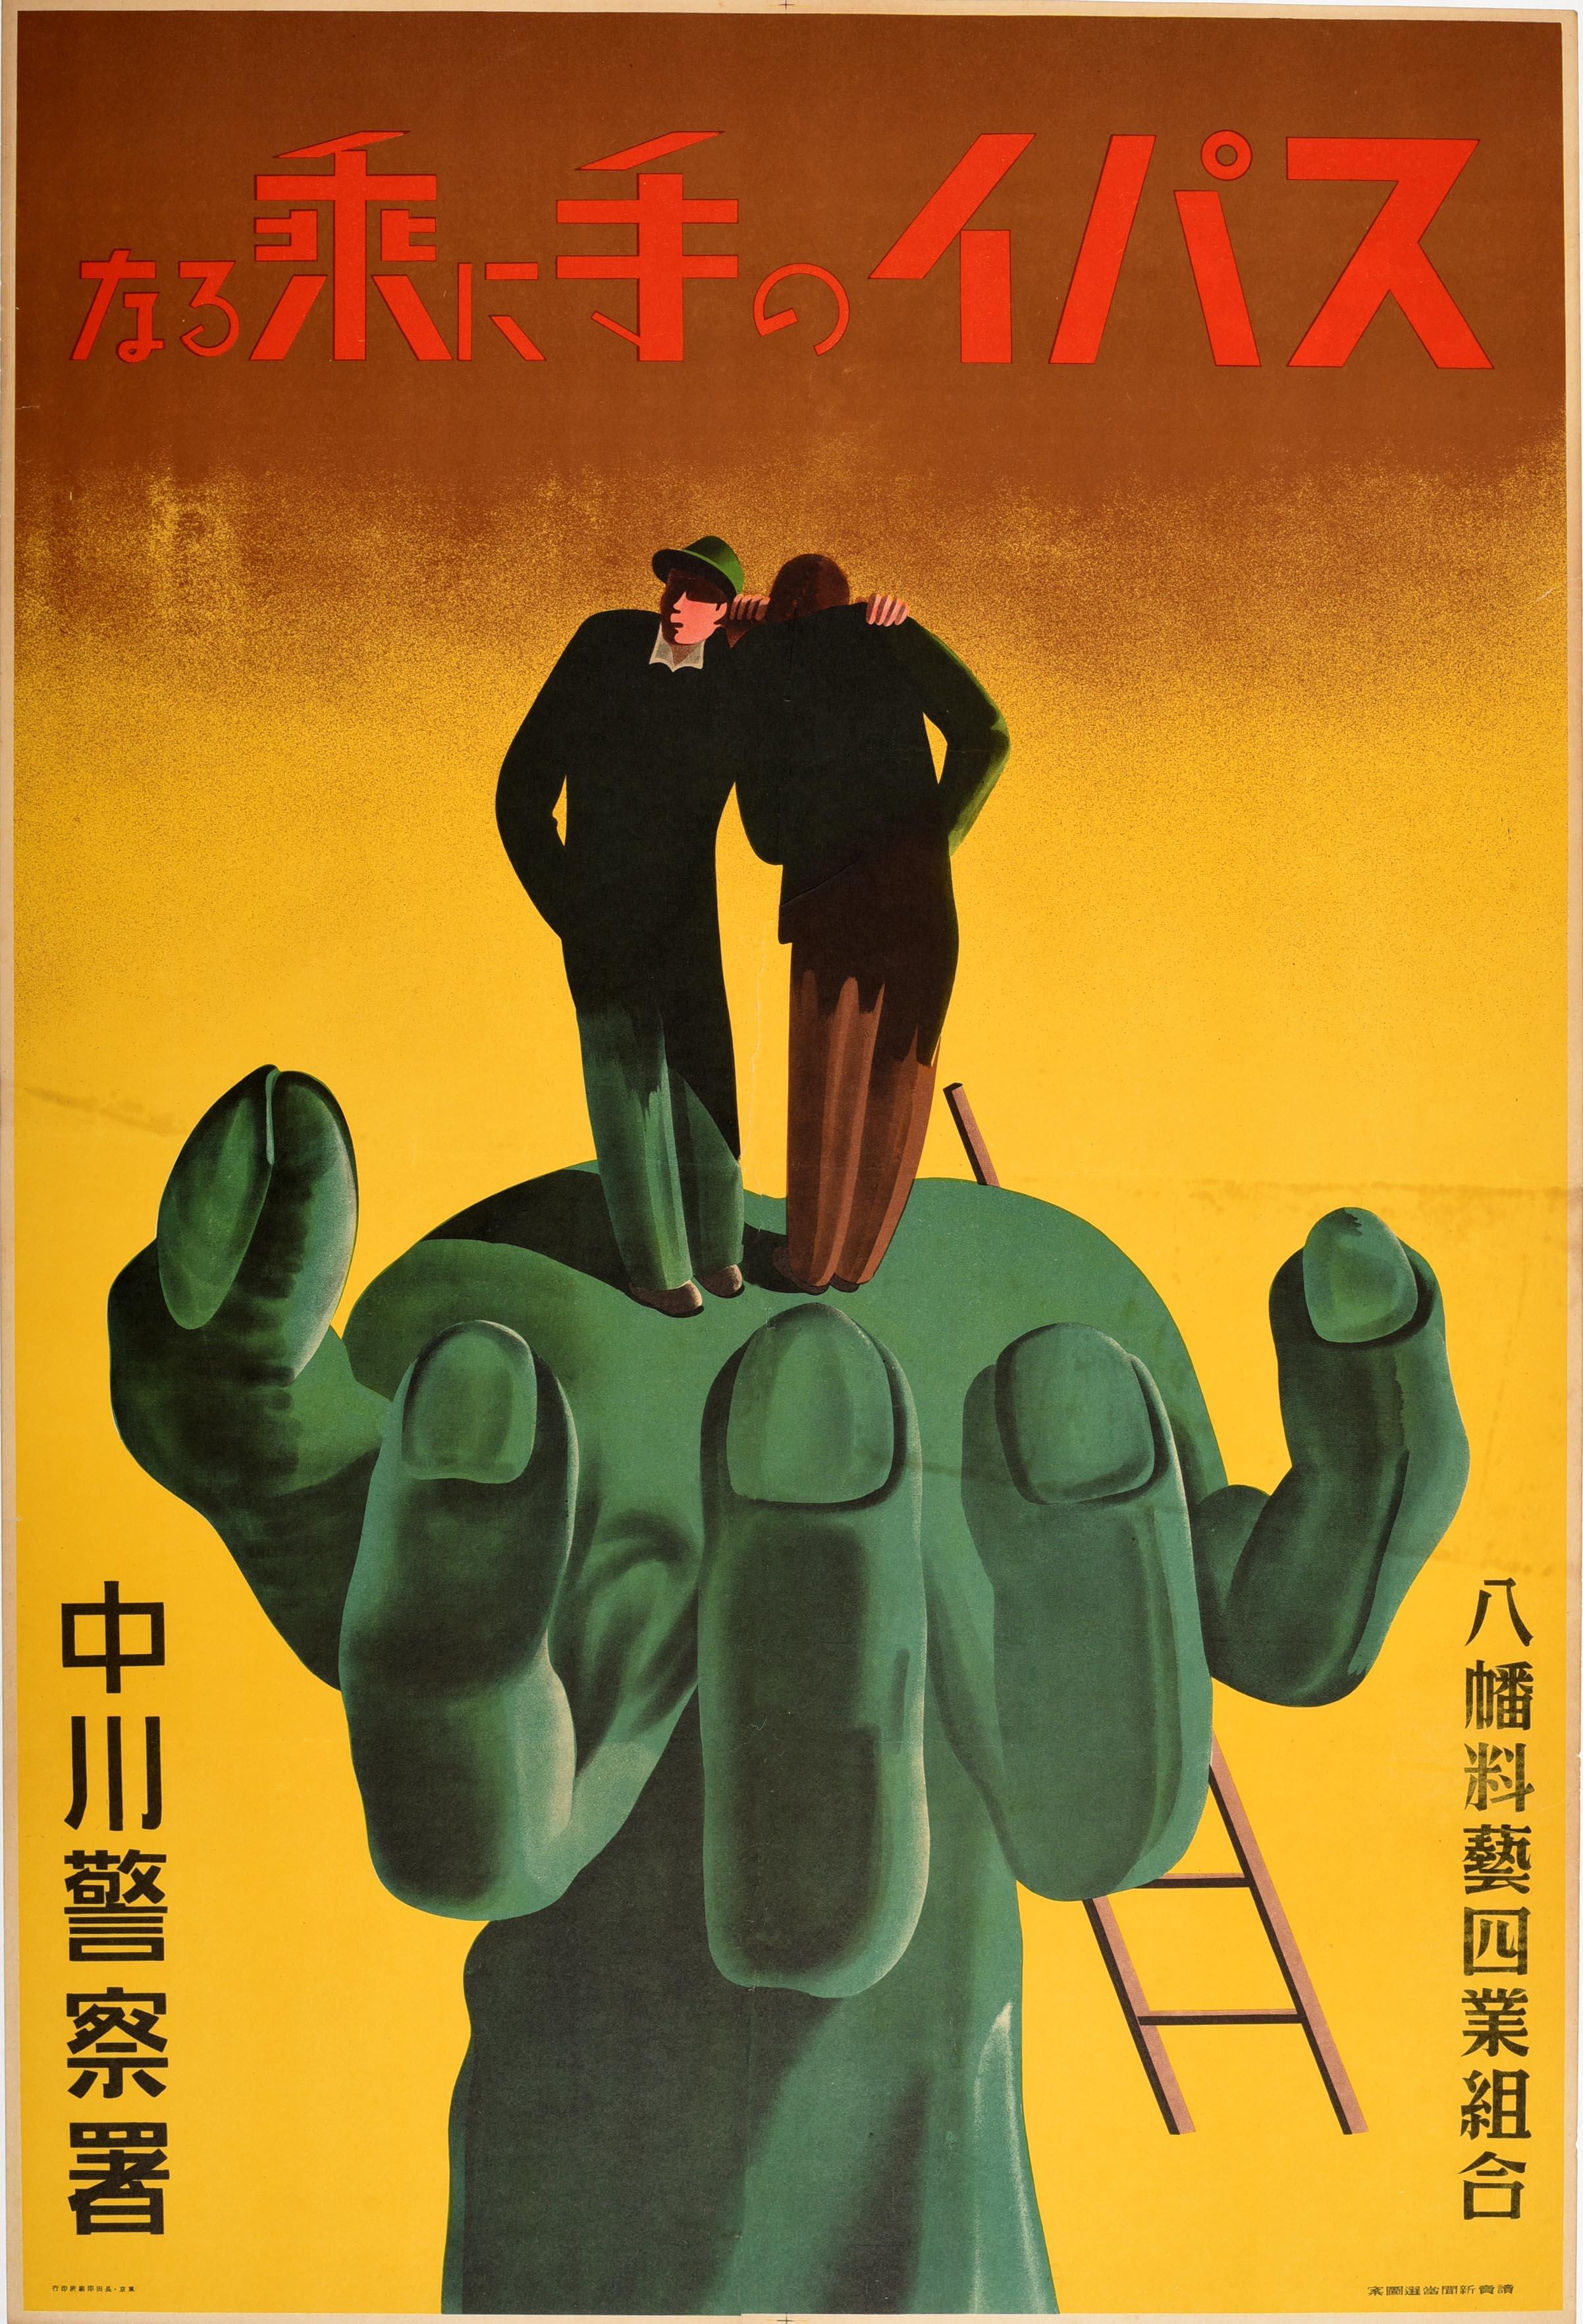 Rare original vintage Japanese World War Two propaganda poster issued by the Nakagawa Police Station and Yawata Ryobu Shigyo Association - Don't Get in the Hand of Spies - featuring a dynamic design showing two people talking in secret with one of